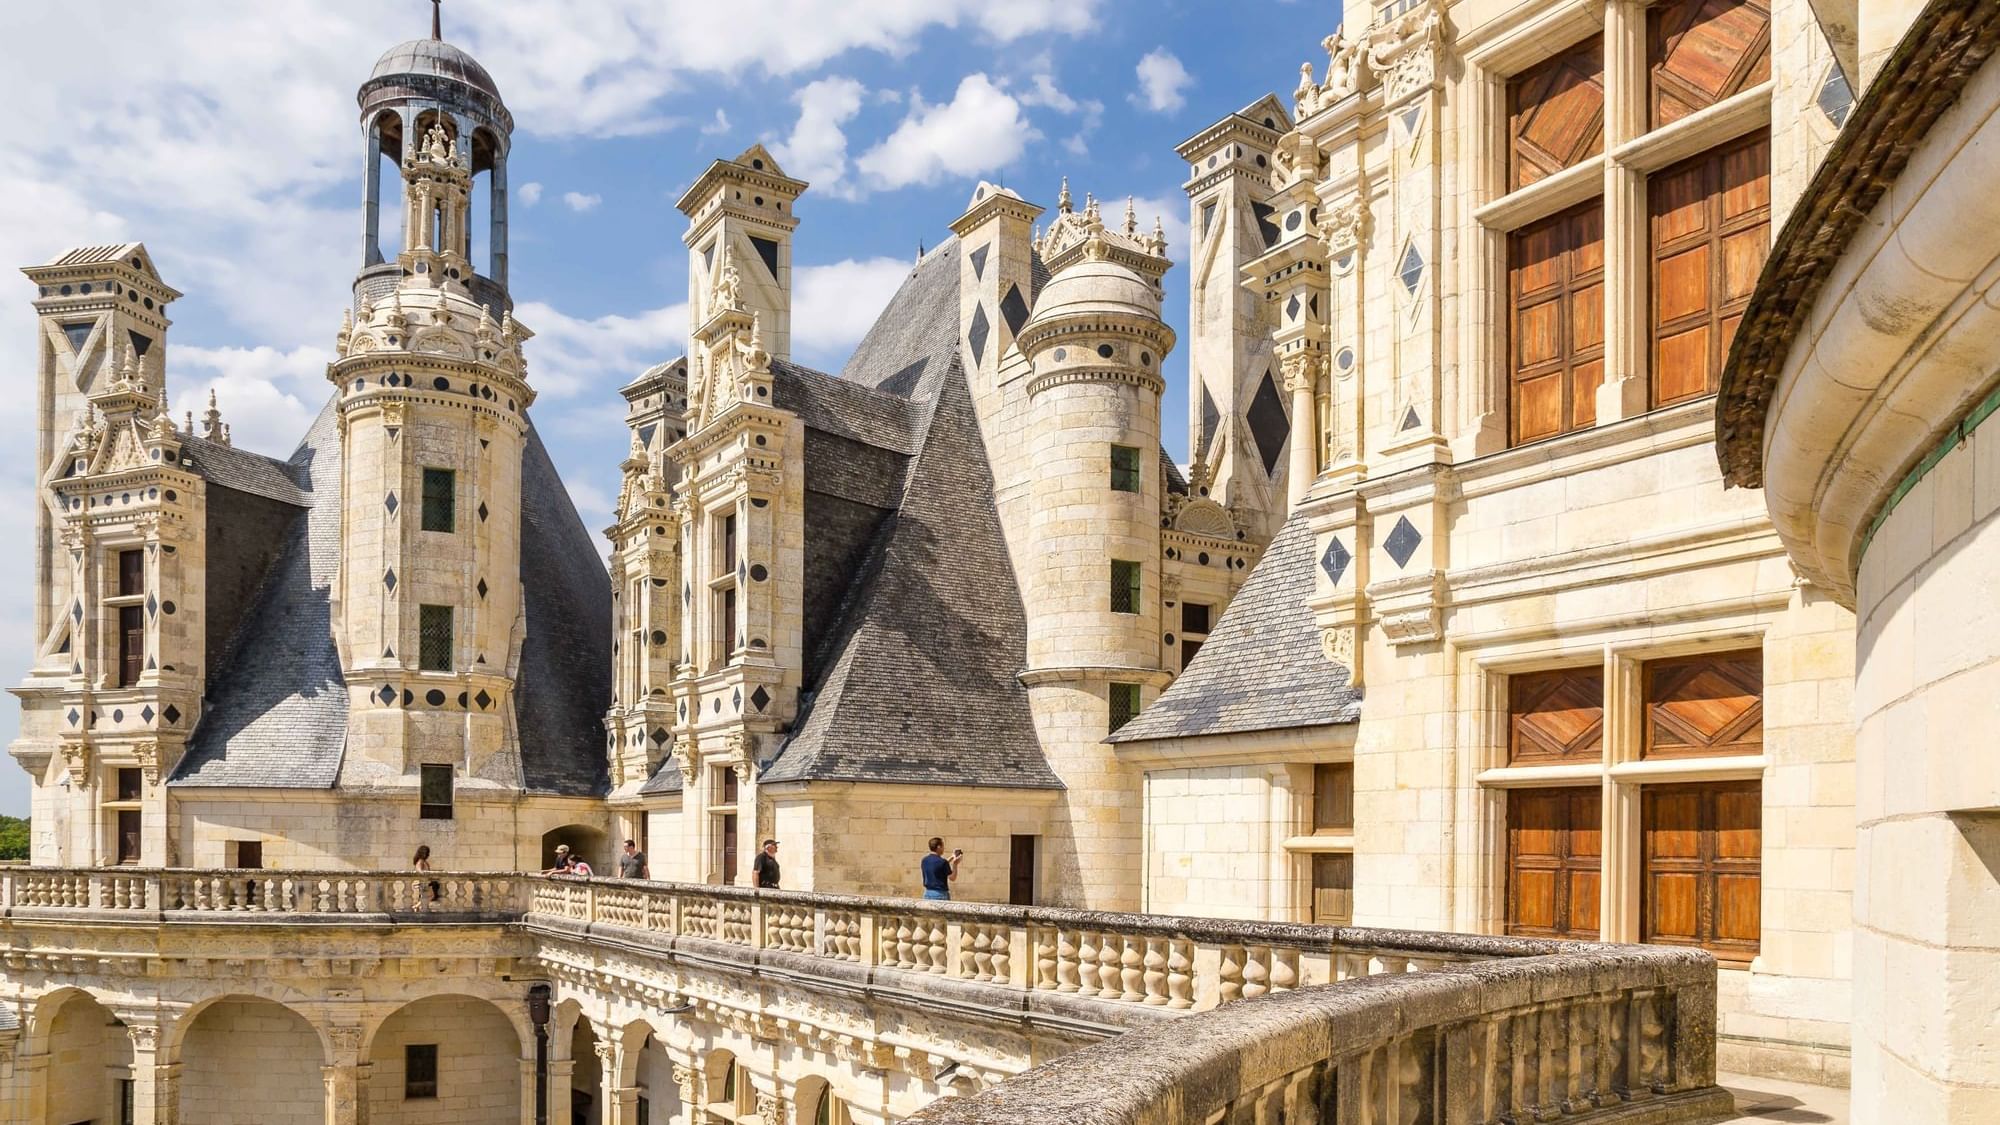 The exterior of Majestic Chambord near the Originals Hotels